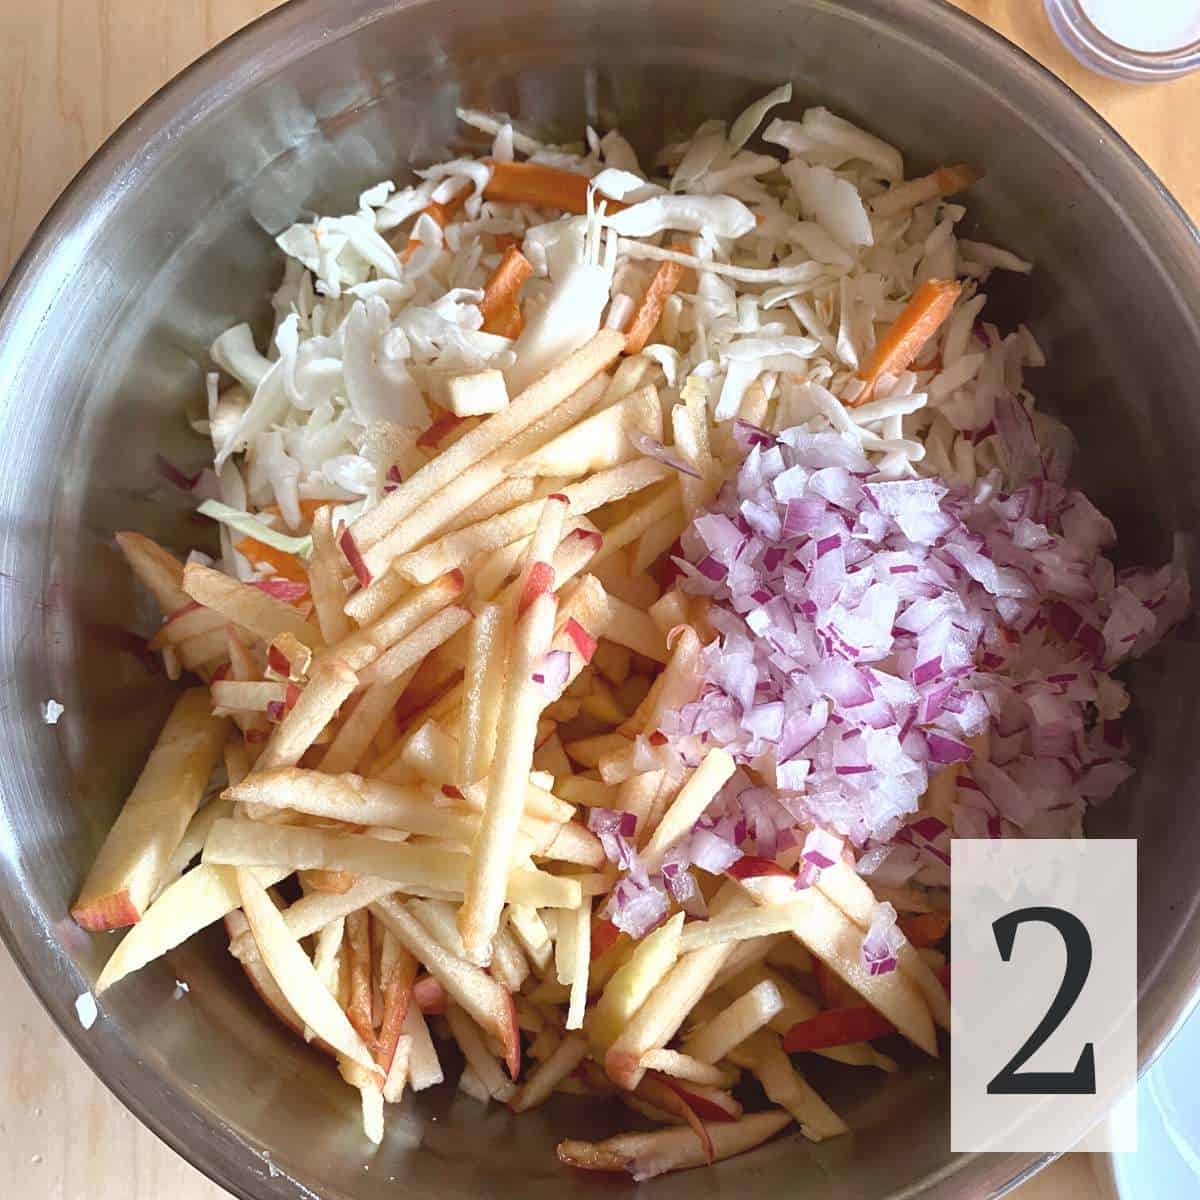 sliced apples, diced red onion, and cole slaw mix in a bowl.